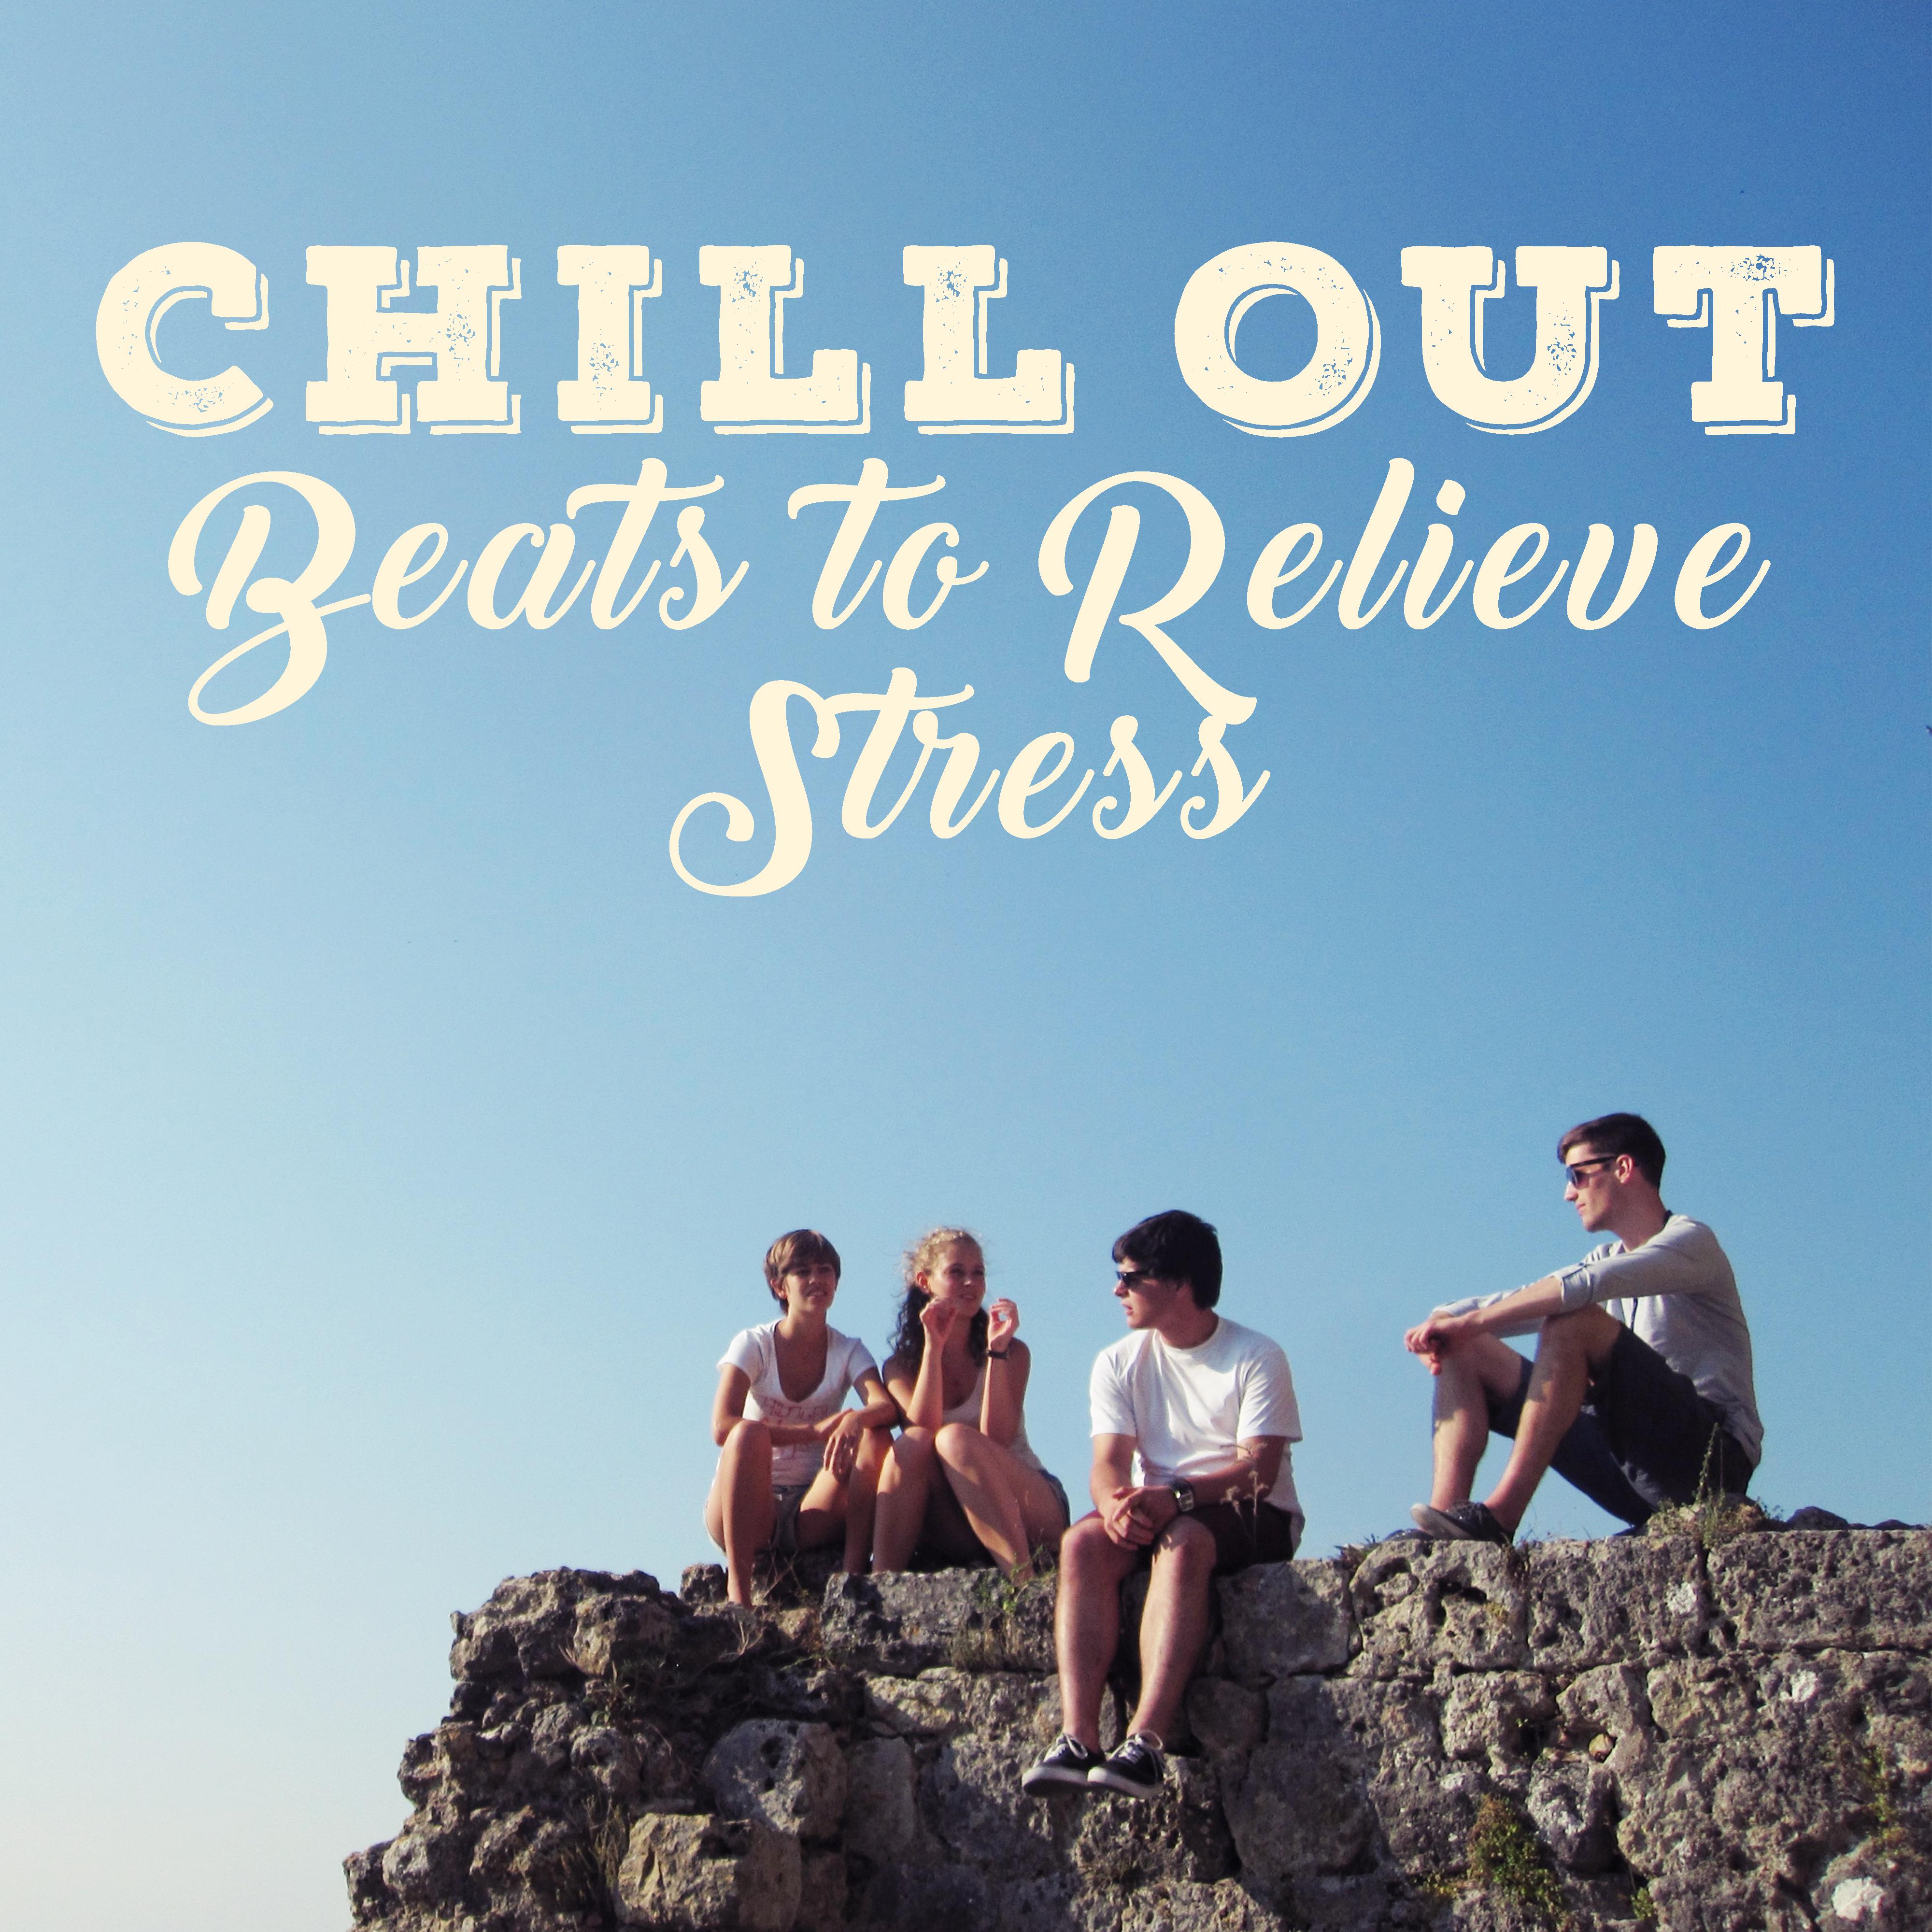 Chill Out Beats to Relieve Stress  Calming Sounds to Rest, Easy Listening, Summer Vibes, Mind Calmness